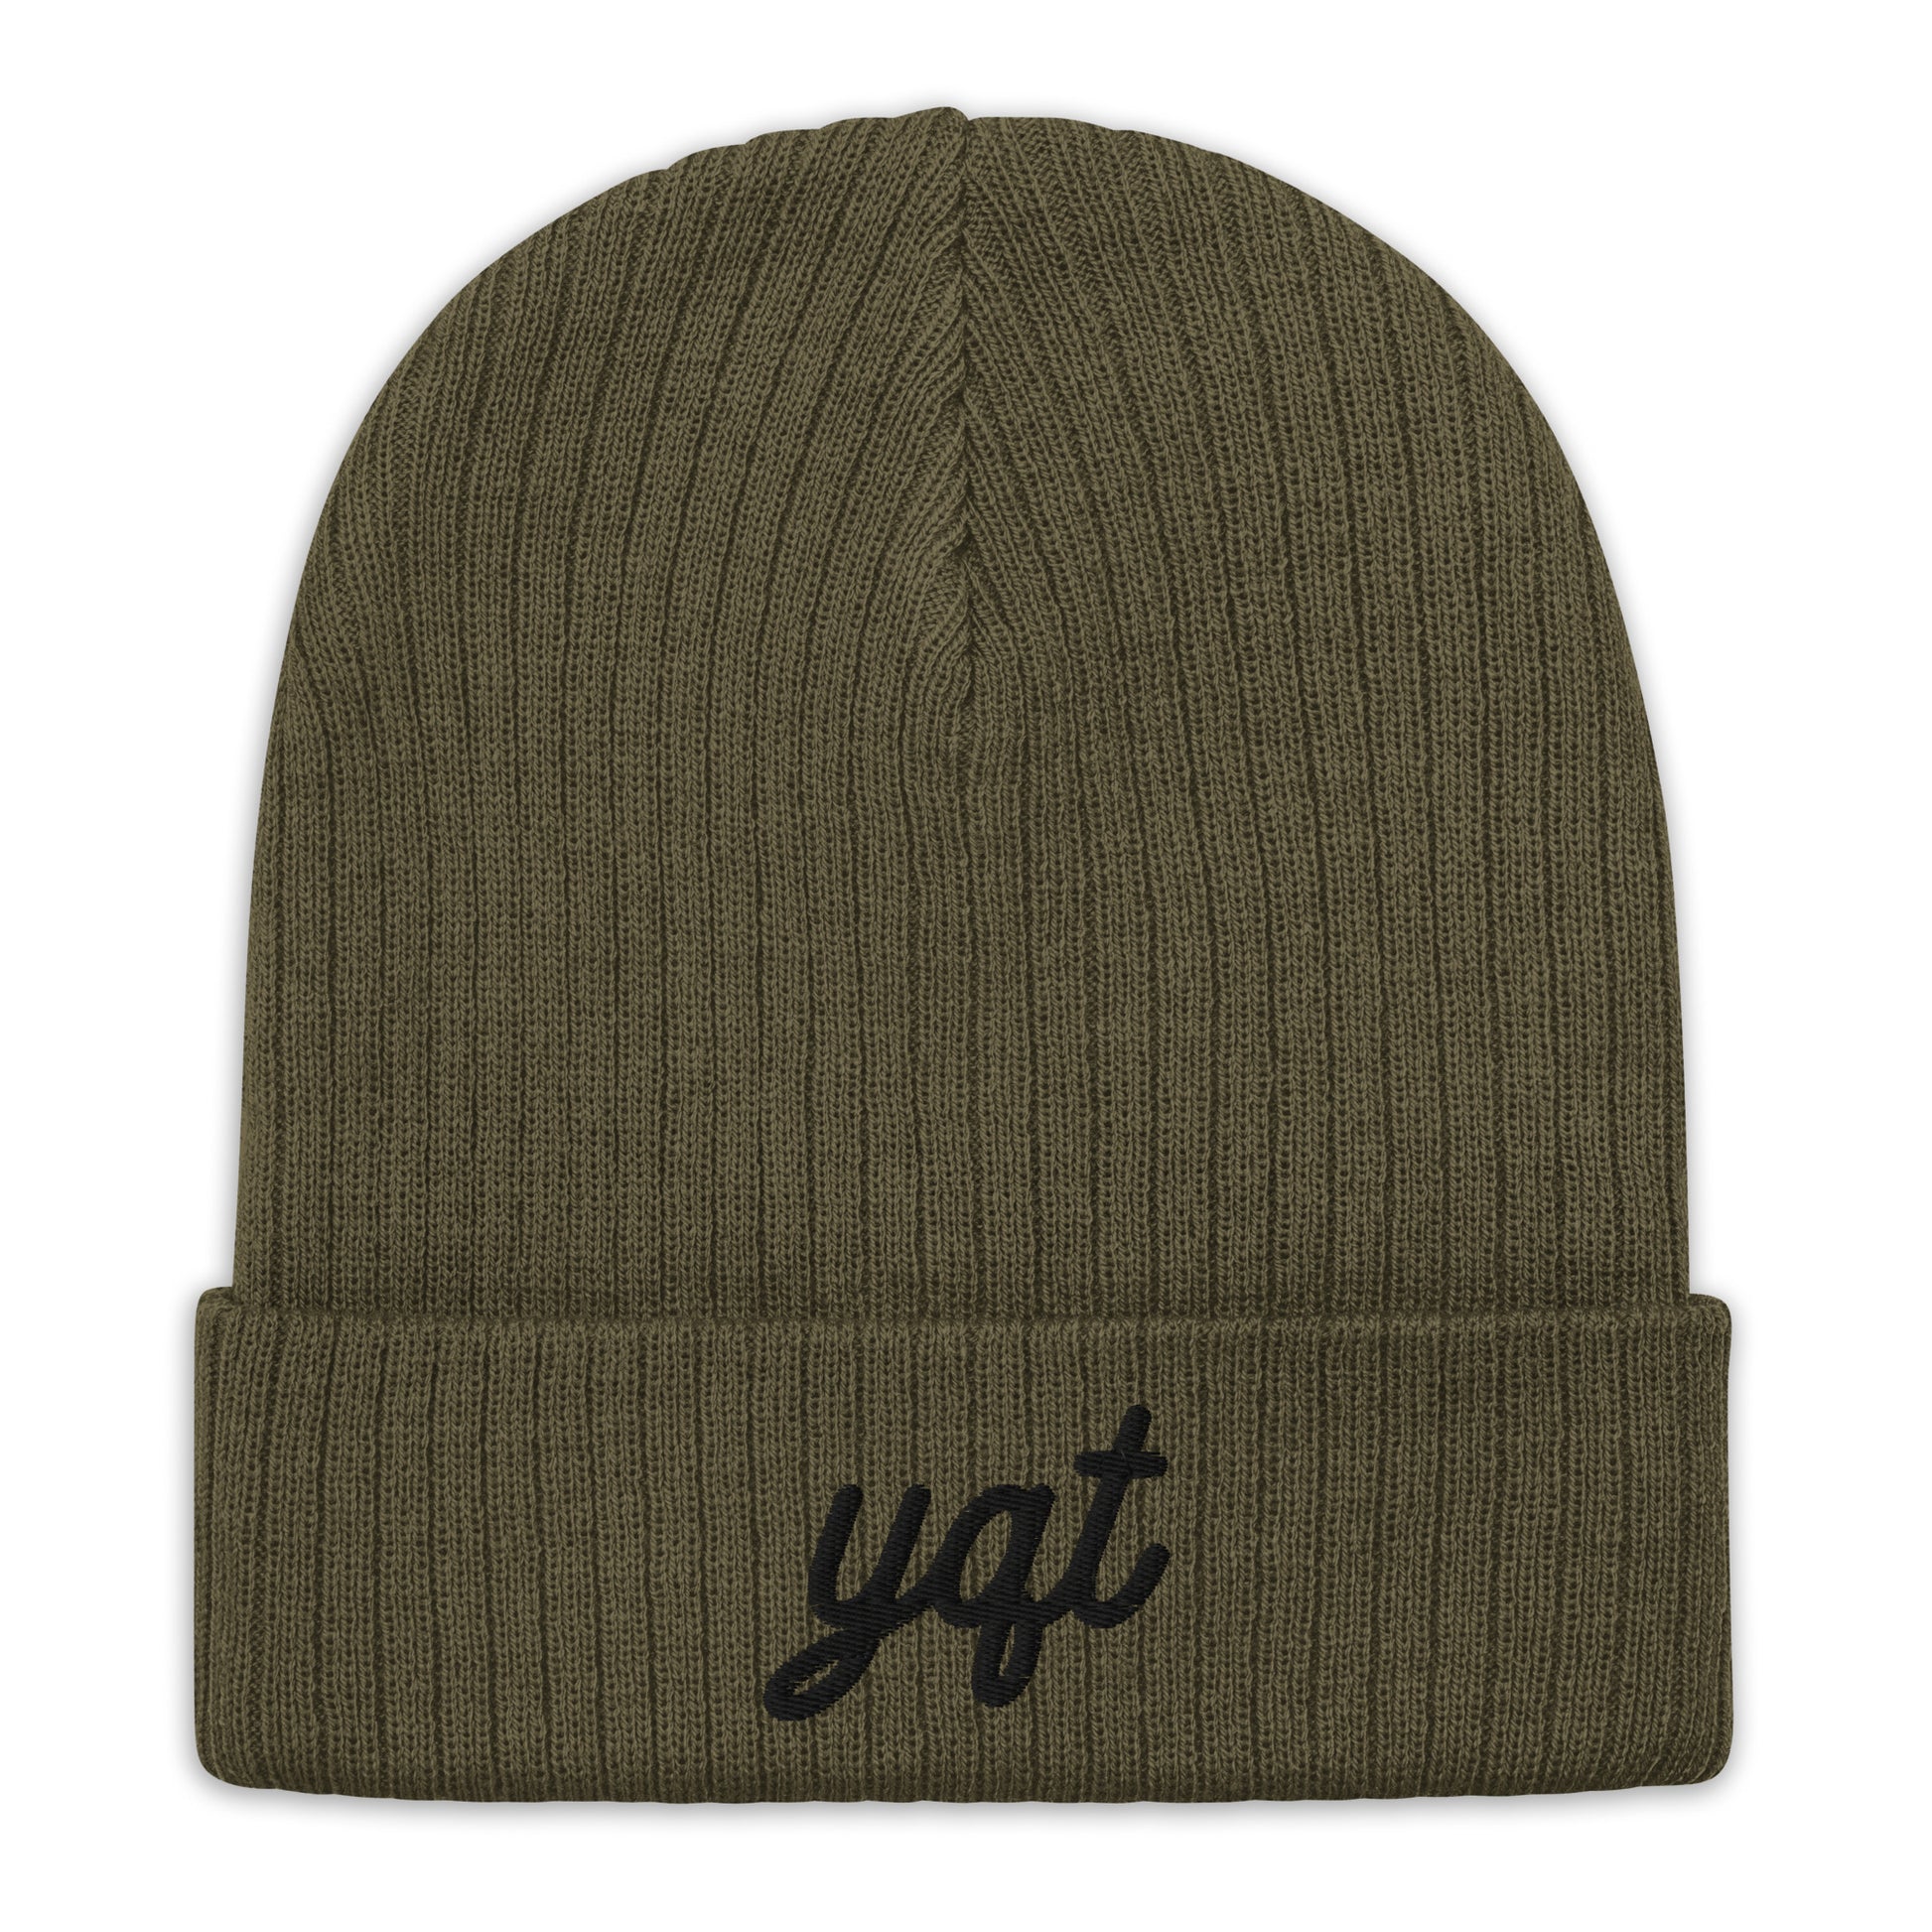 Vintage Script Recycled Cuffed Beanie • YQT Thunder Bay • YHM Designs - Image 09